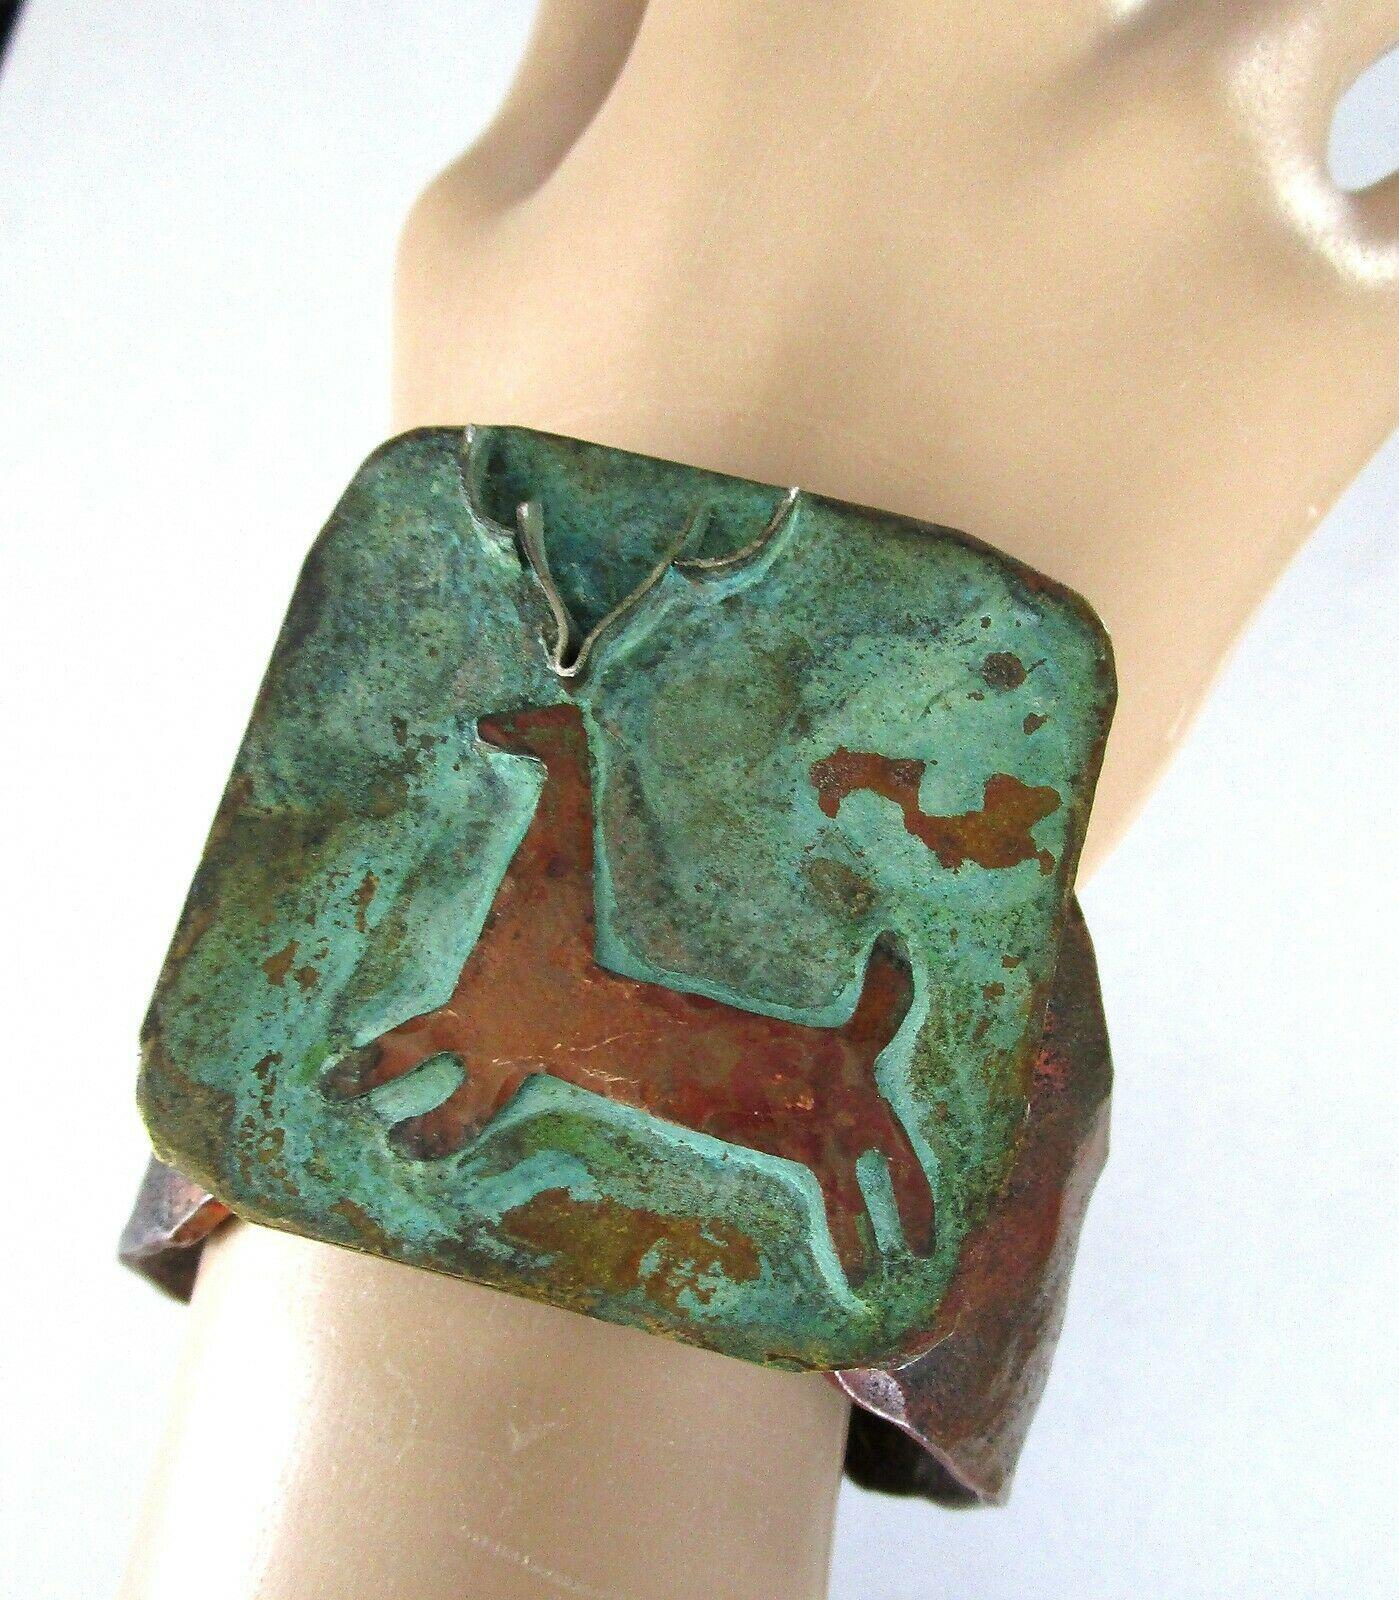 Stunning Museum Quality Artist Signed Cuff Bracelet and Brooch. Hand crafted in Copper and mixed metals featuring an Antelope. Bracelet measures approx. 2